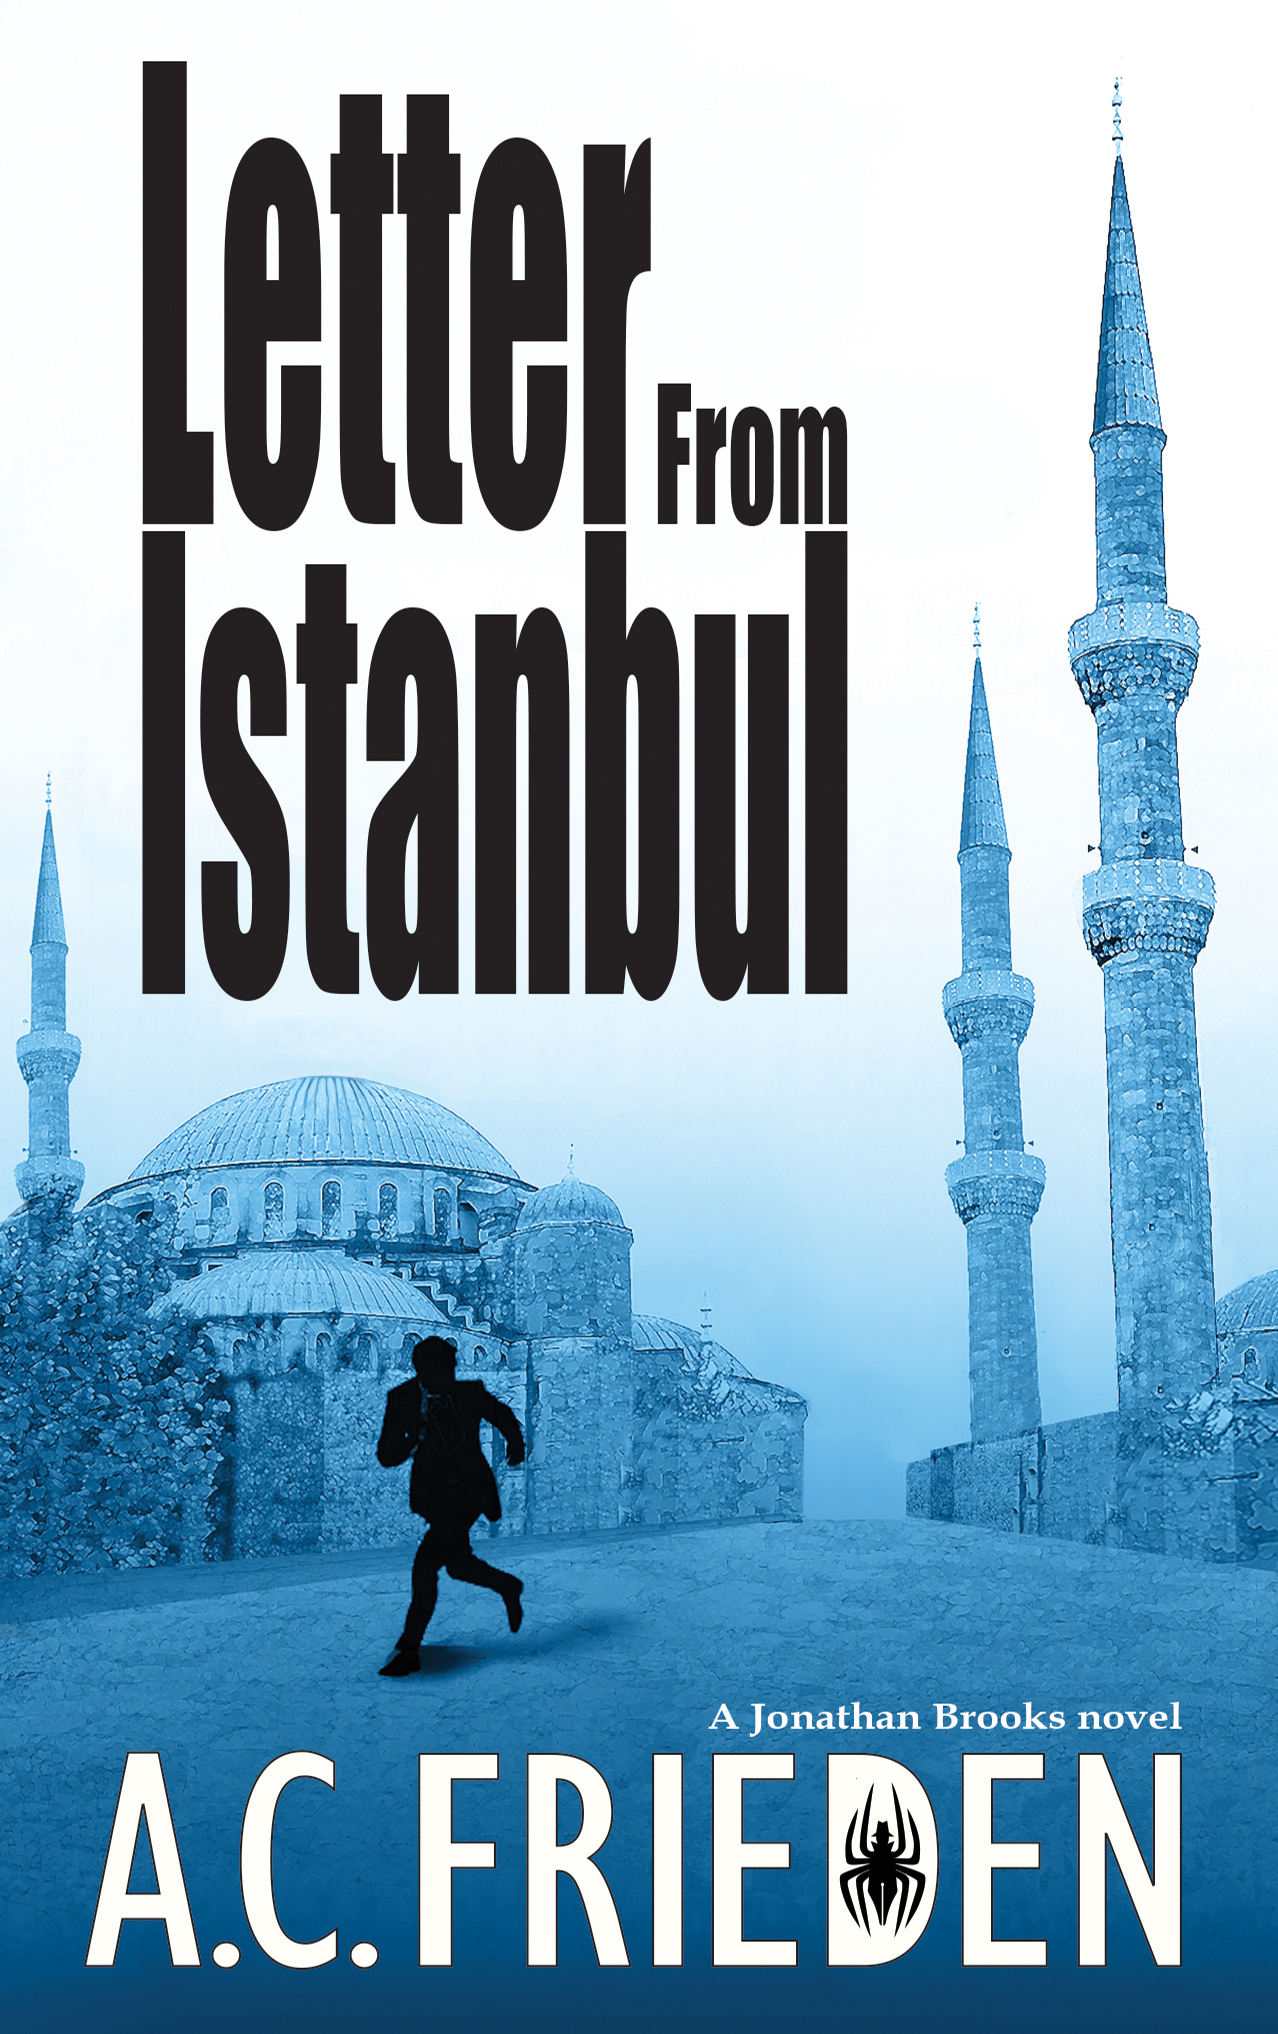 Letter from Istanbul